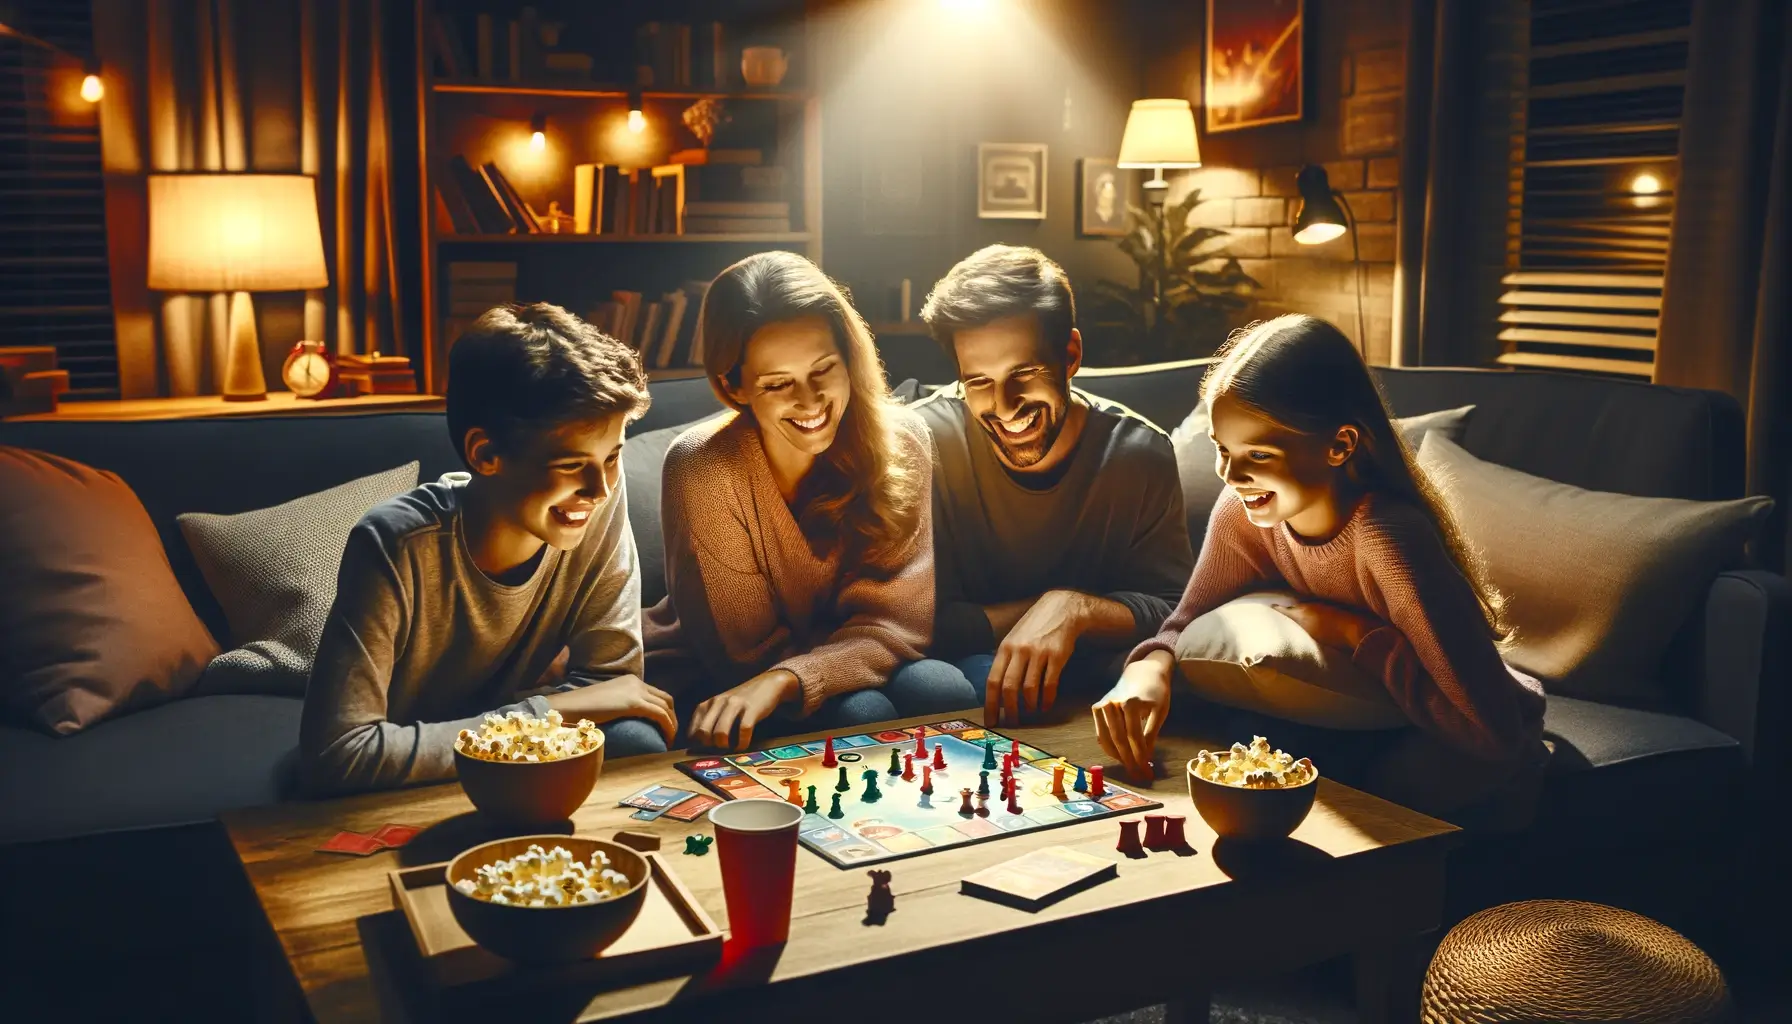 A family enjoys a board game during family game night, with joyful expressions around a table laden with game pieces and snacks in a warmly lit living room.